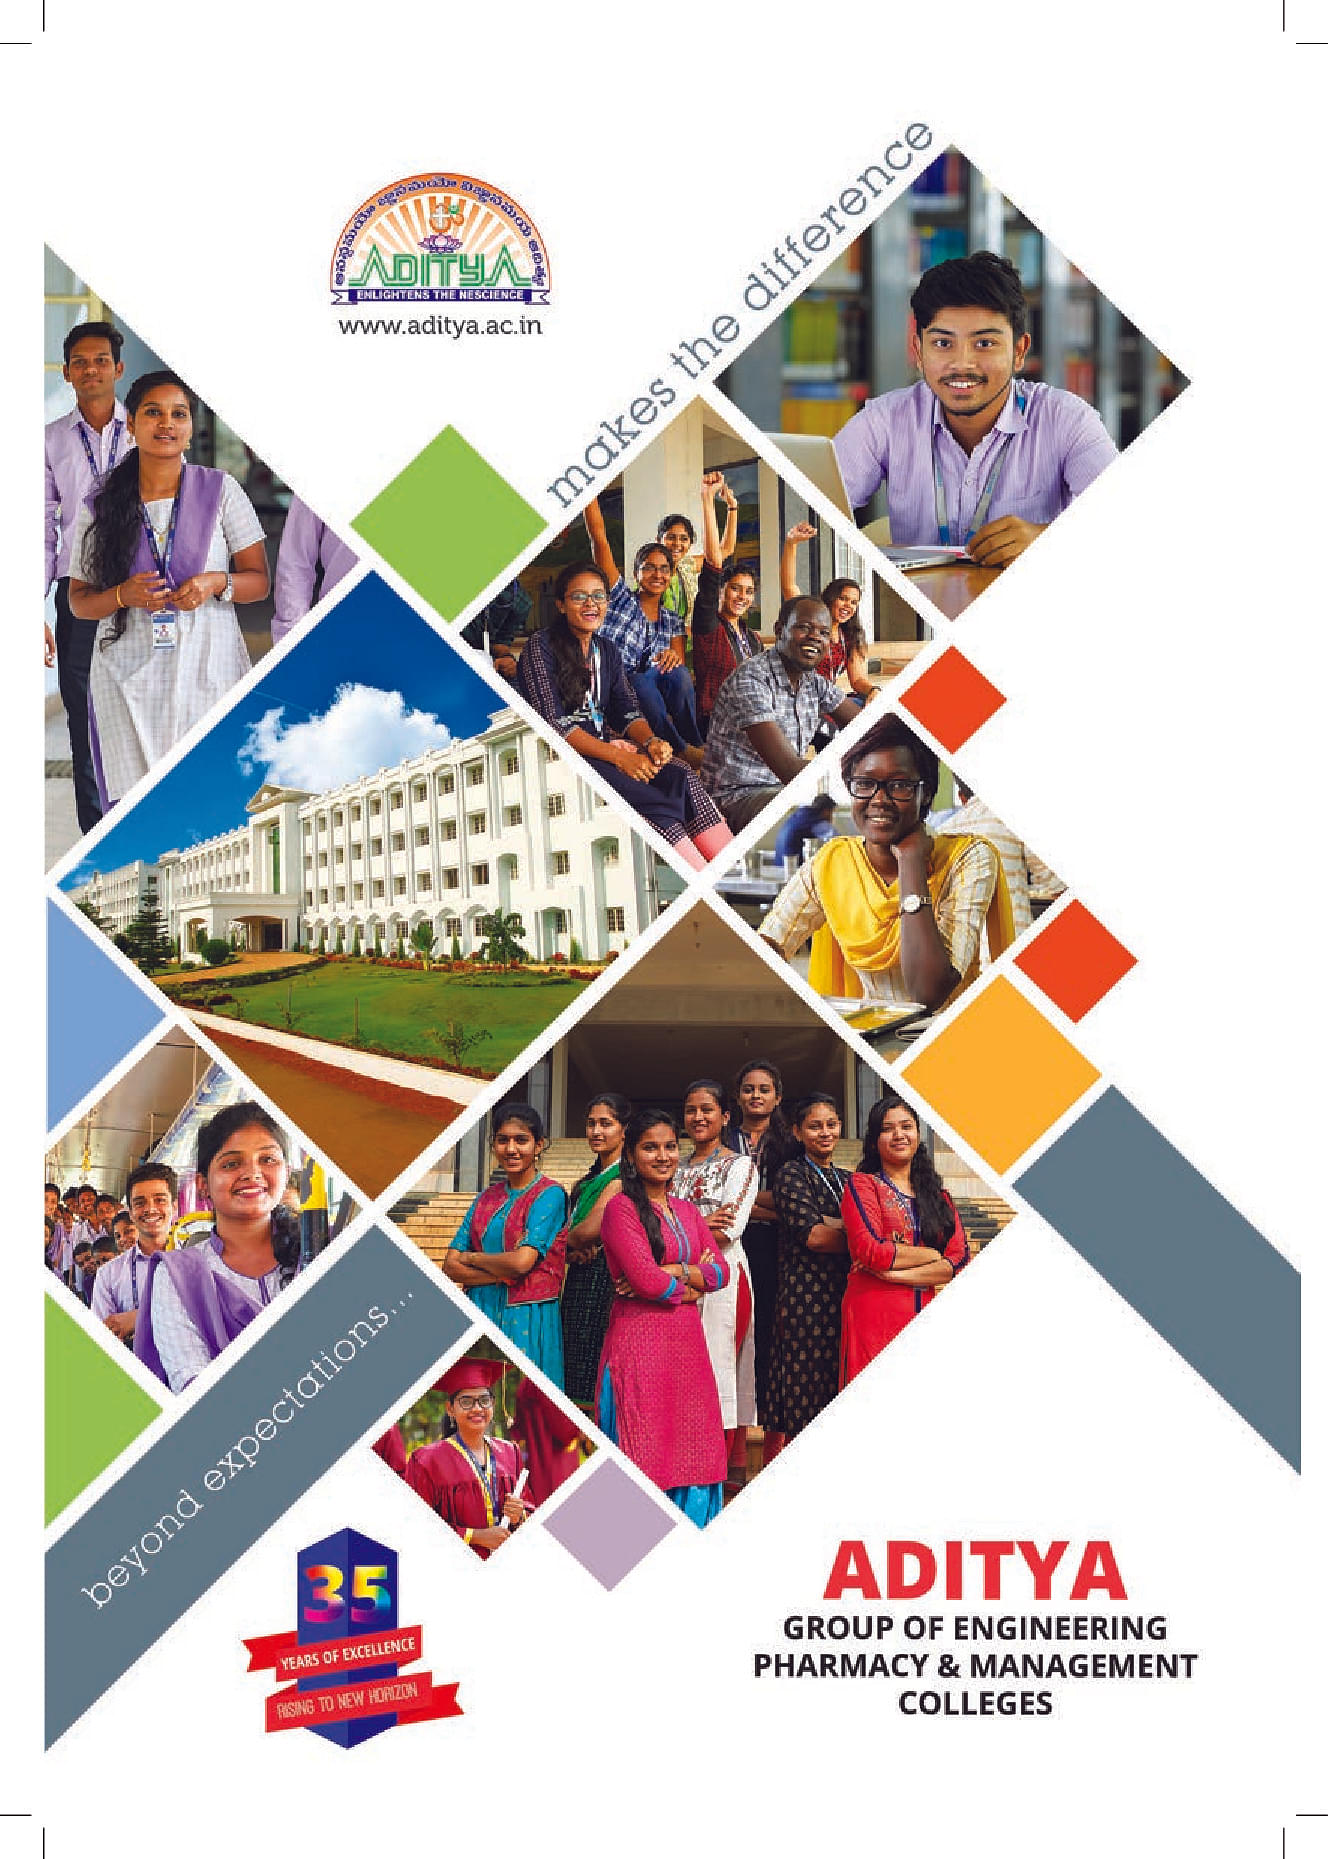 Aditya Engineering College - Placement, Courses, Fees, Admissions 2020